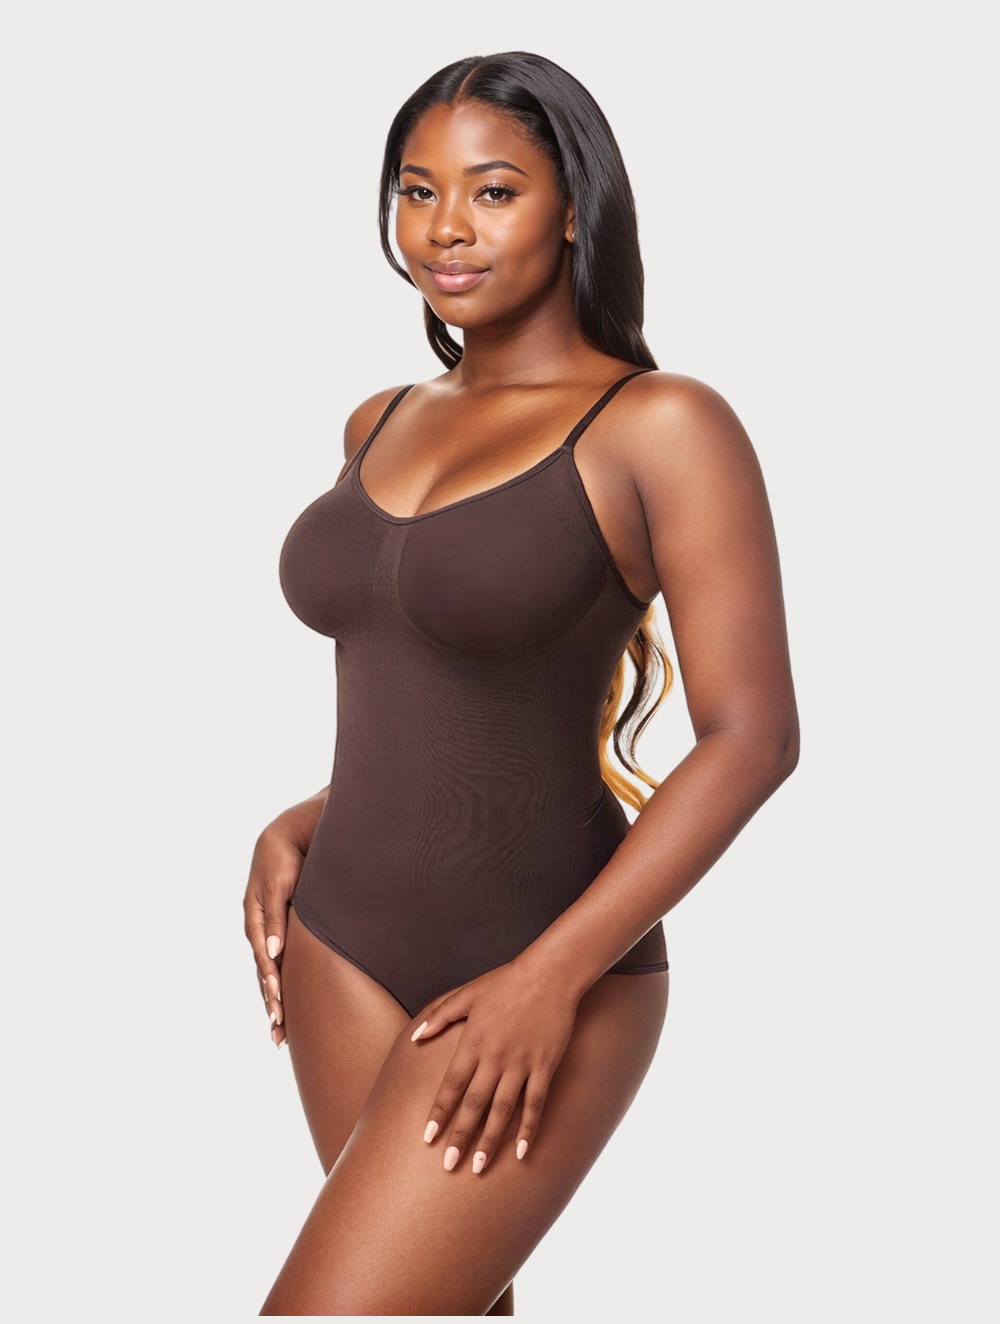 Whom You Know: Miraclesuit® Shapewear Highly Recommended by Whom You Know!  It is what Peachy Deegan is Wearing Underneath it All!